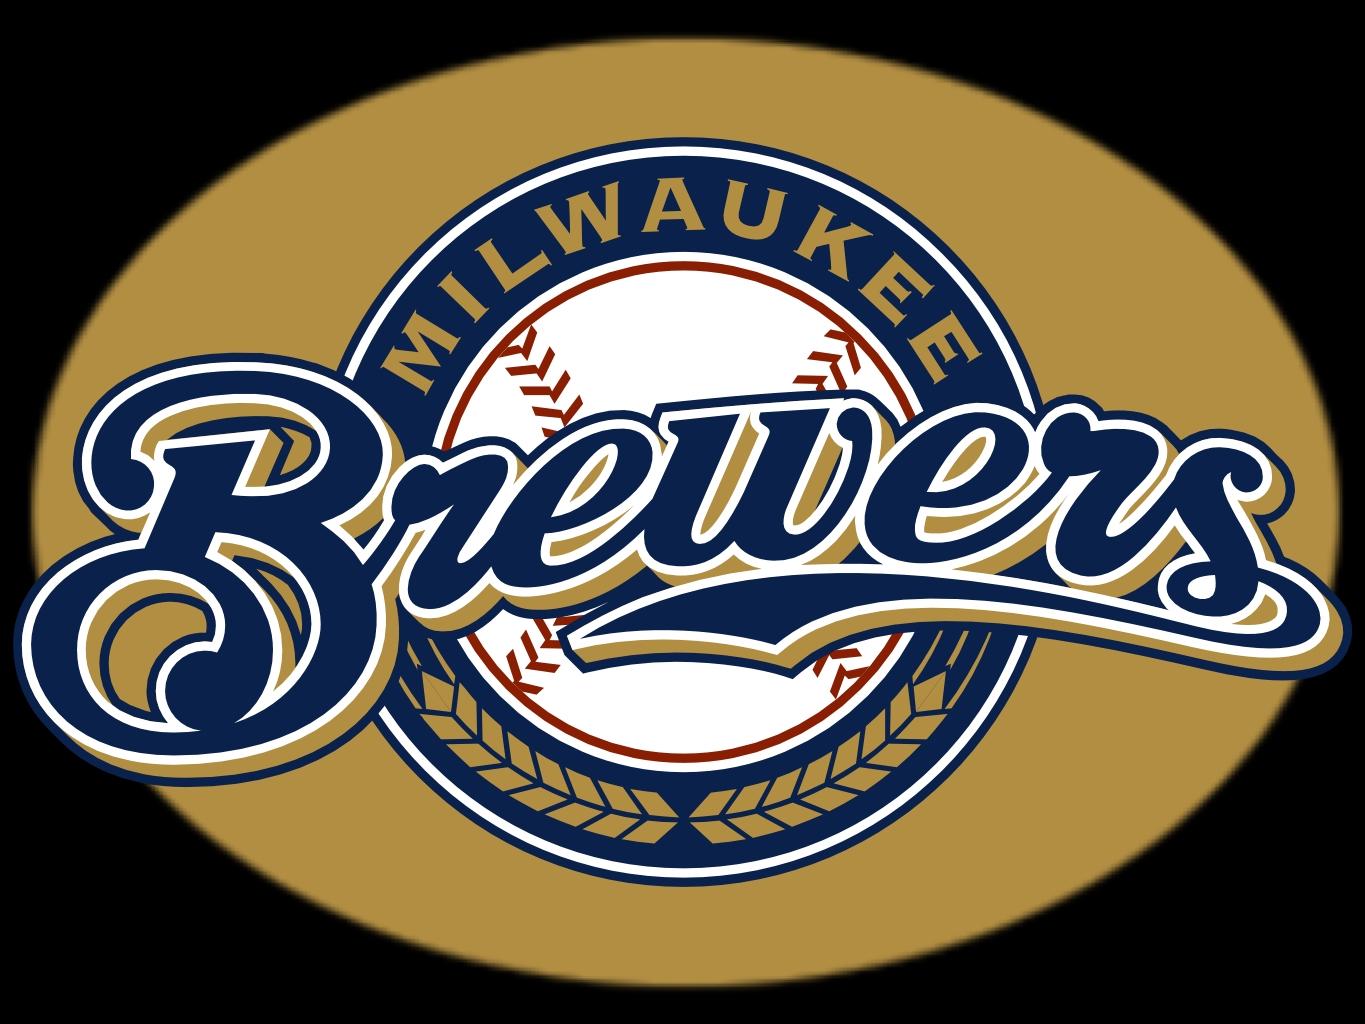 Brewers Logo Wallpapers - Wallpaper Cave